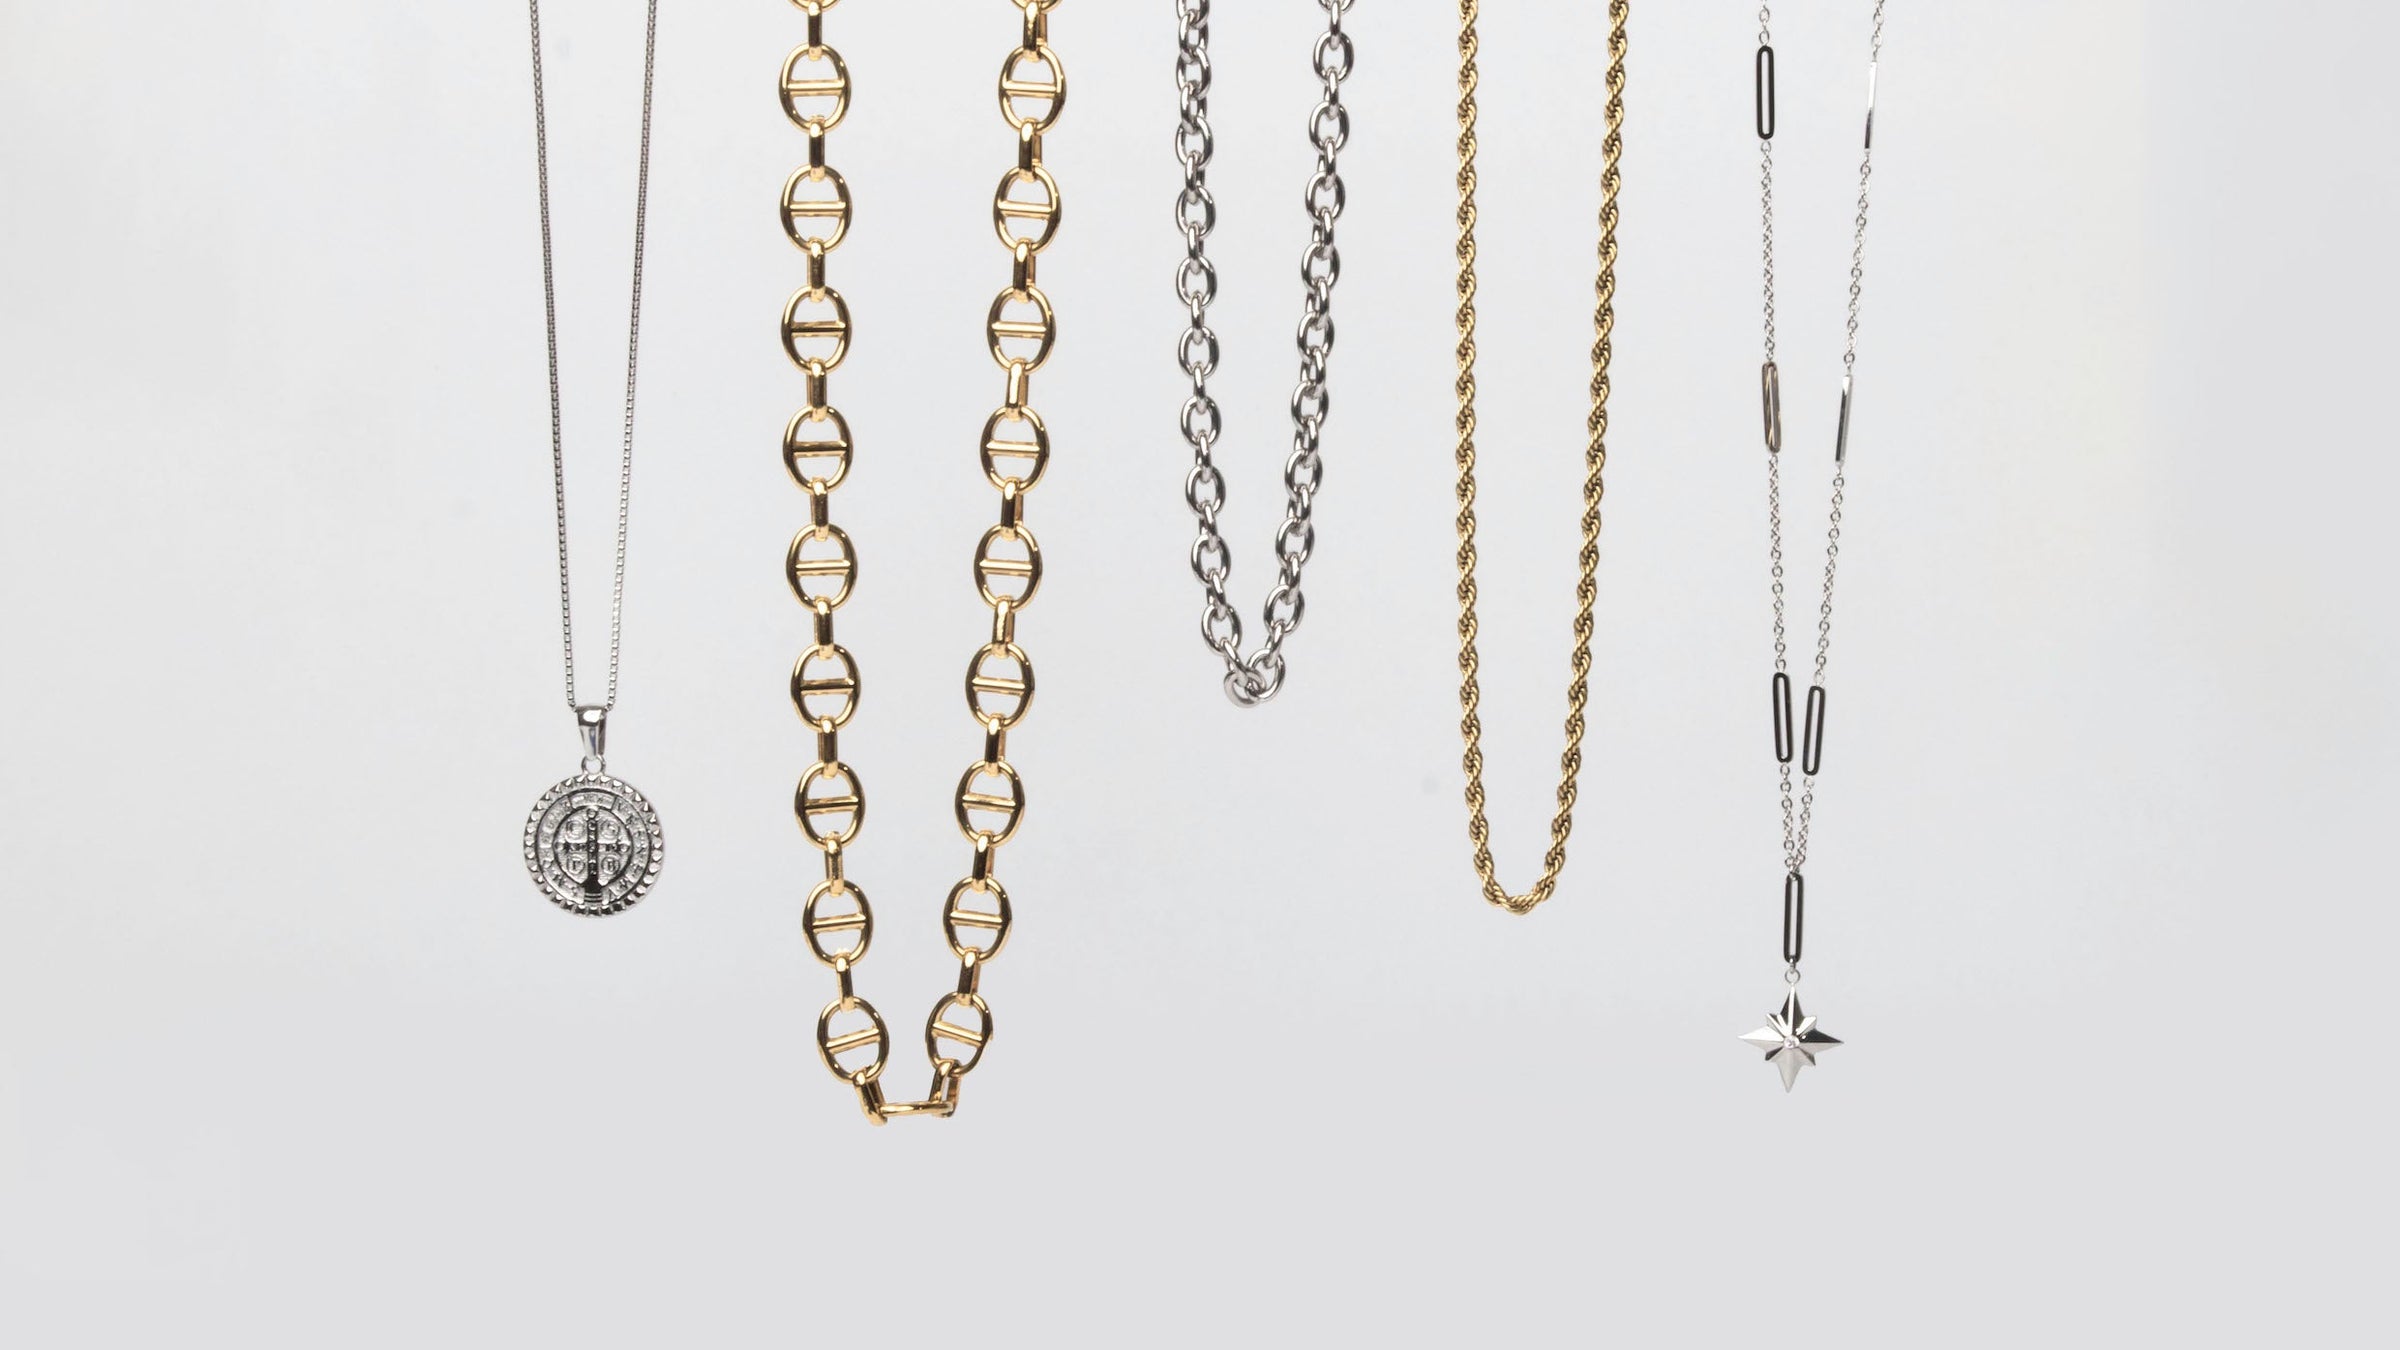 Necklaces from the MARRIN COSTELLO jewelry collection, hanging as if being worn, to showcase the different styles of necklaces. Available in both 14k gold plated stainless steel and polished stainless steel.